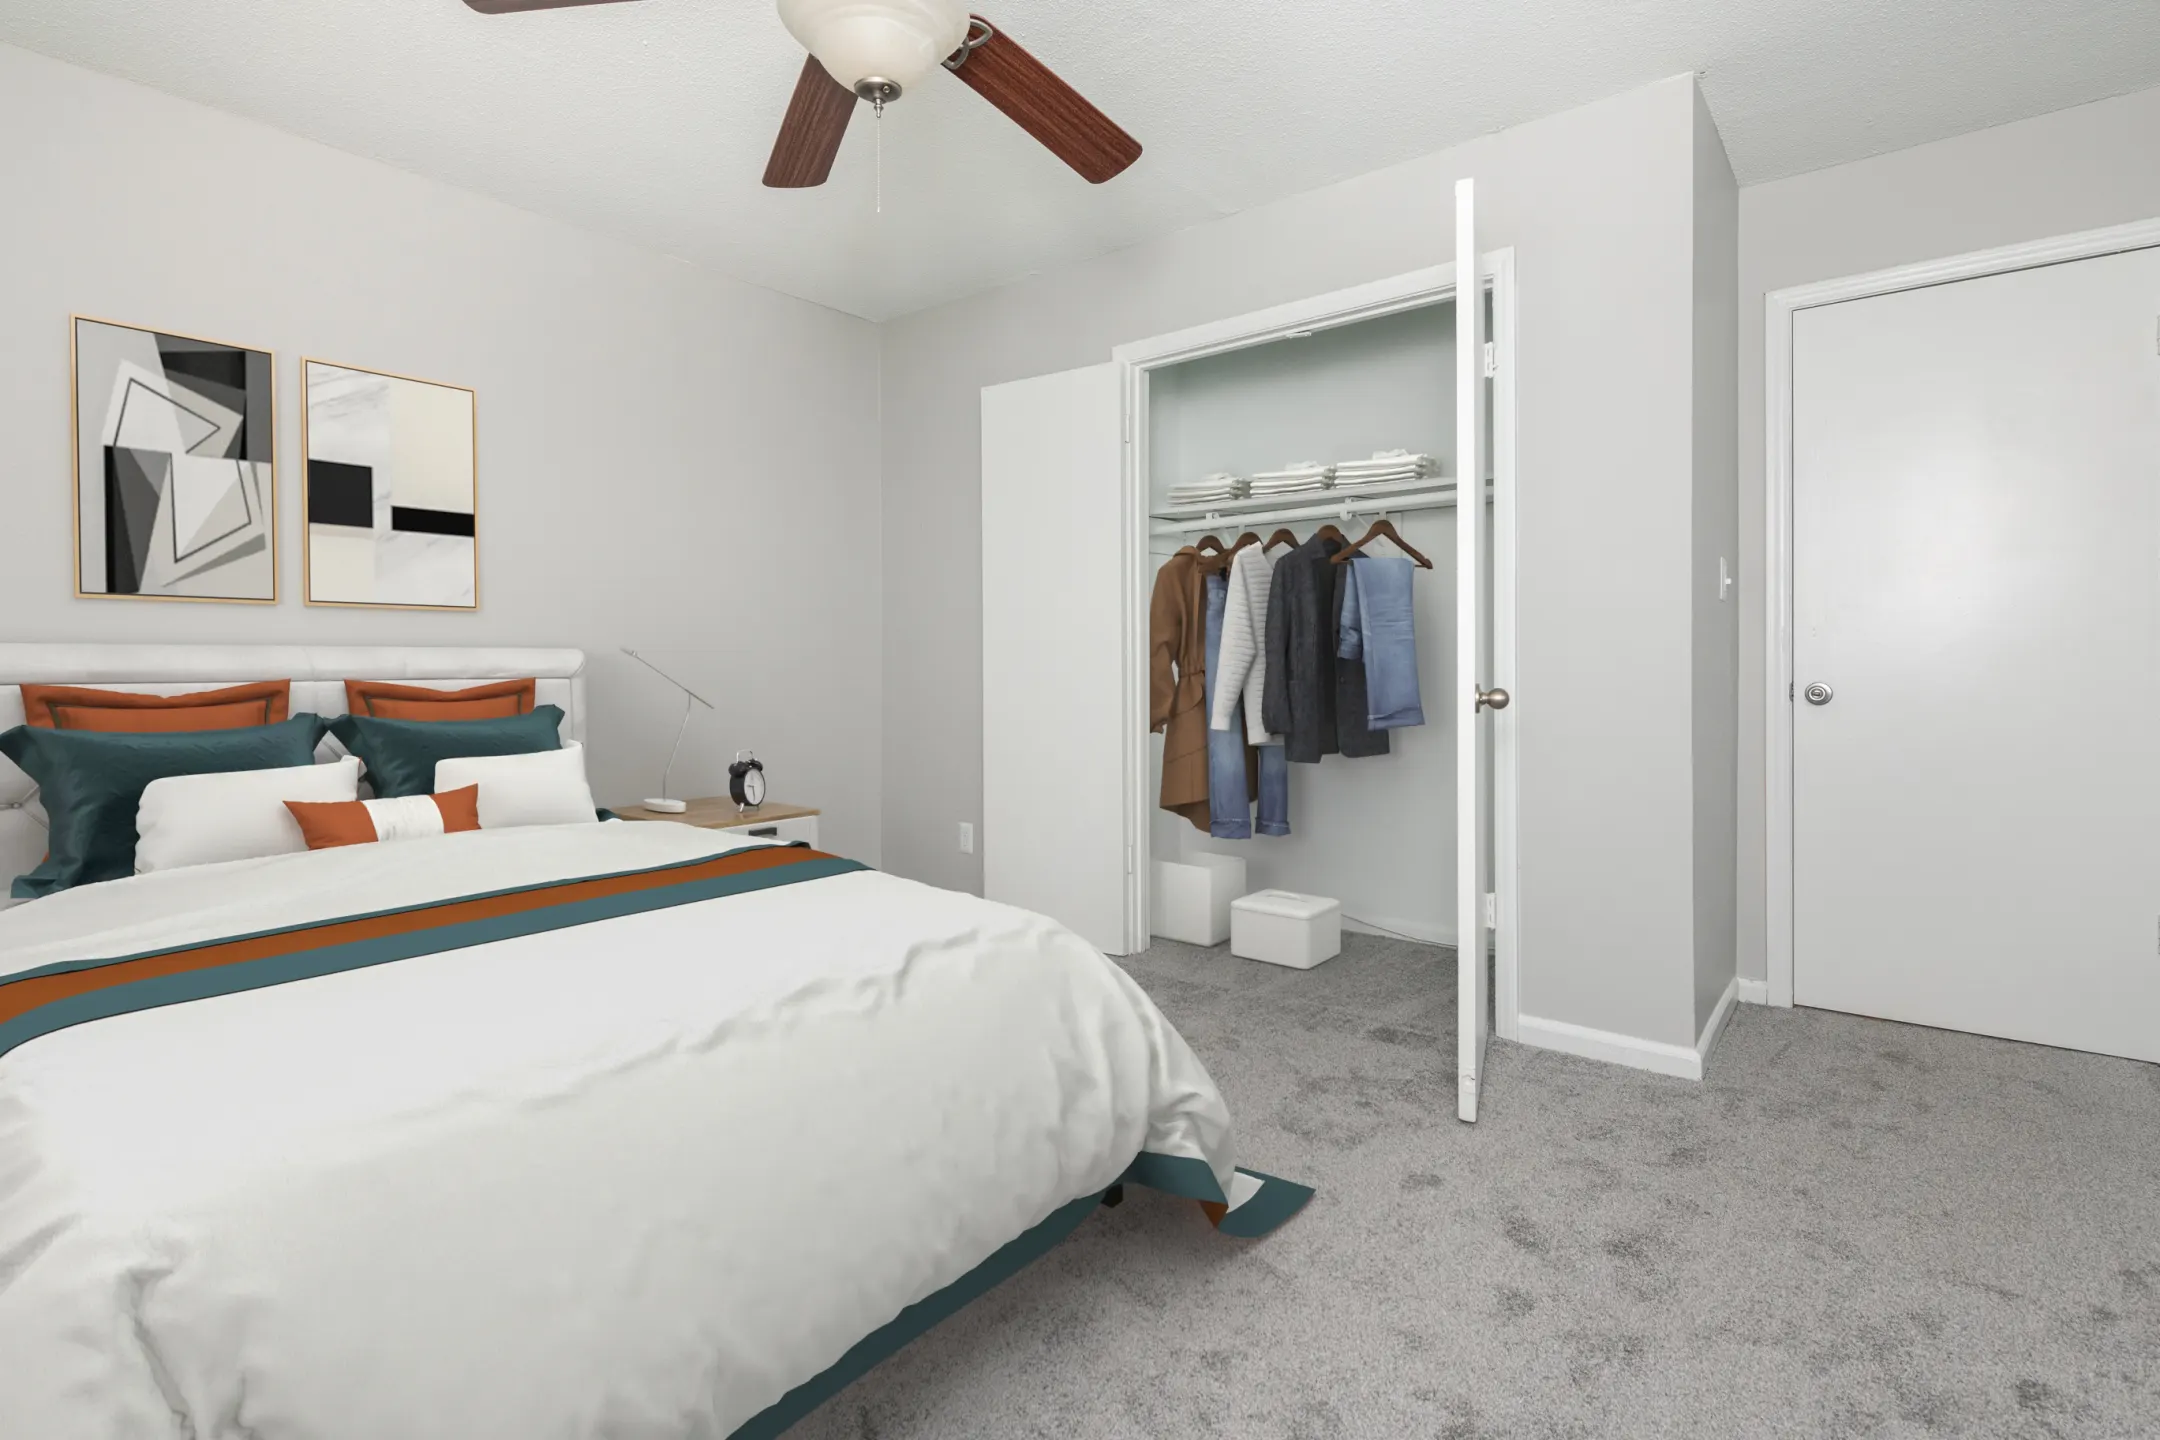 Bedroom - Sage Pointe Apartments & Townhomes - Charlotte, NC